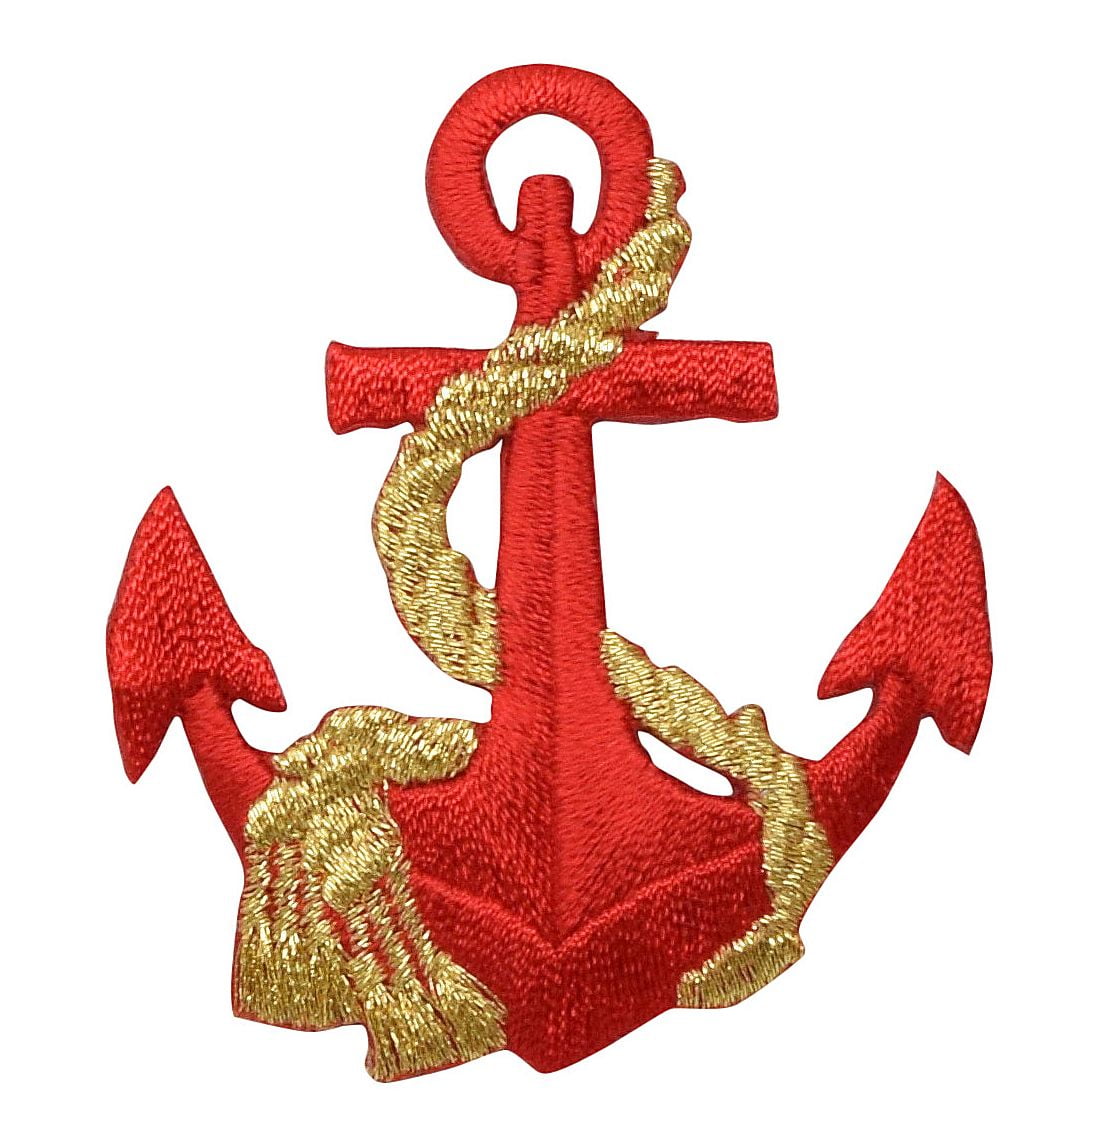 #2282 Red,Navy Blue,Golden,Red Anchor w/Rope Embroidery Iron On Applique Patch 